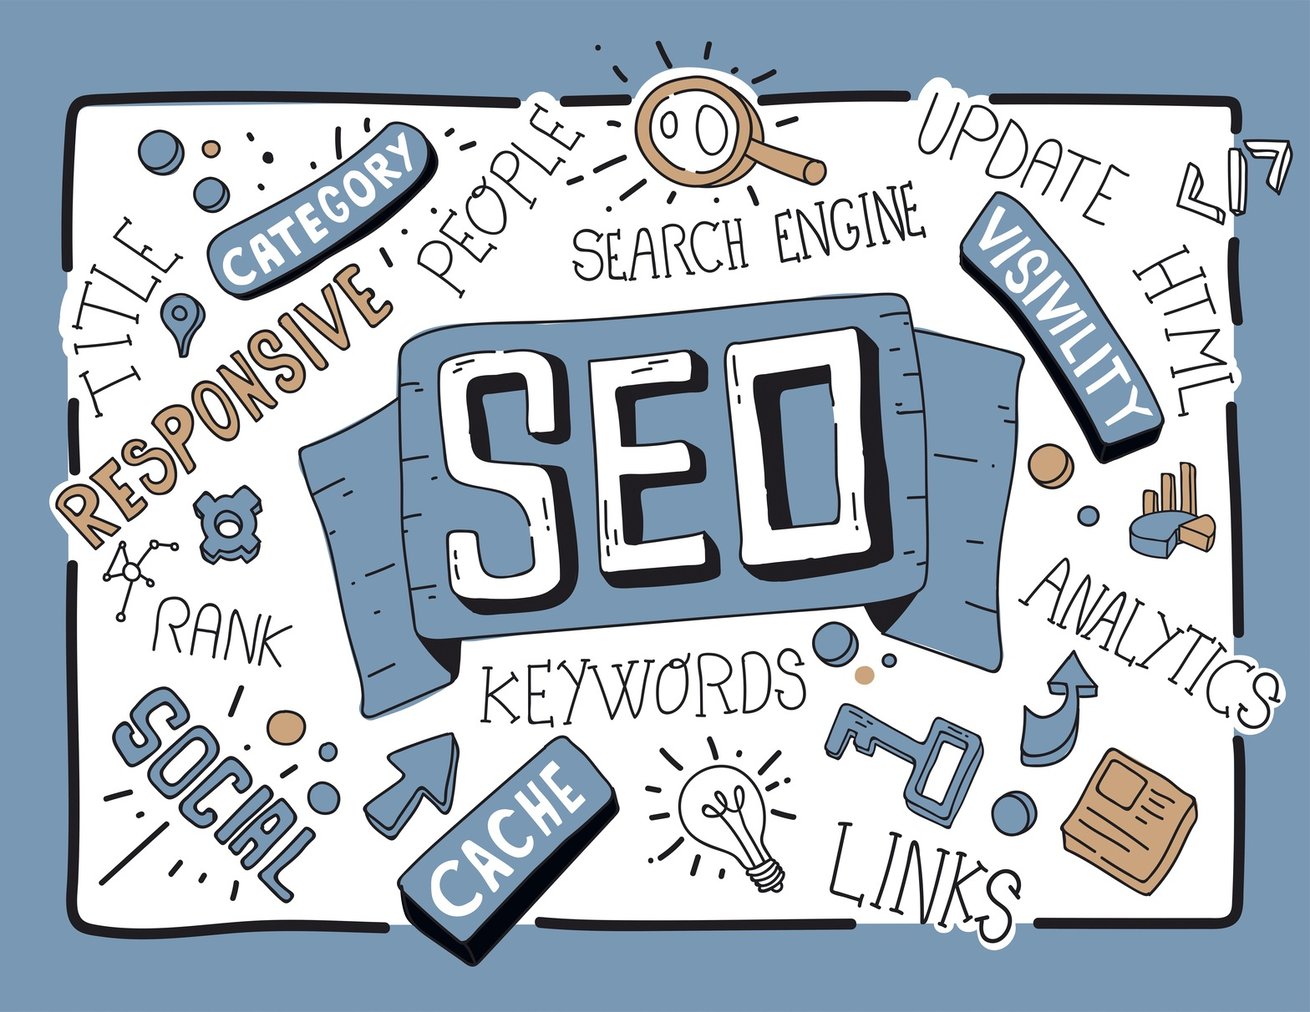 75 Steps to SEO Success (infographic)